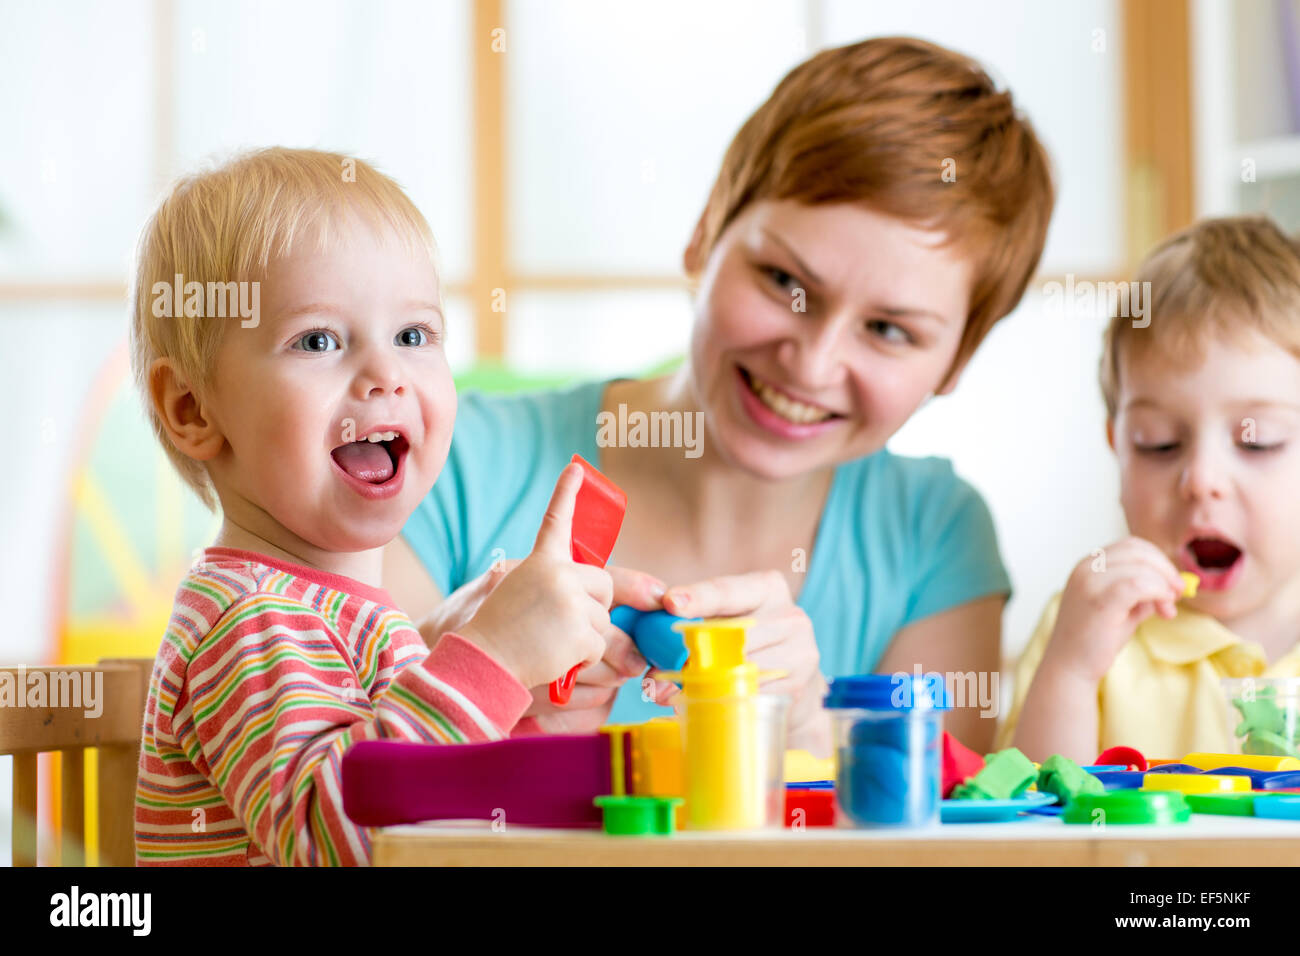 woman playing and teaching with kids Stock Photo